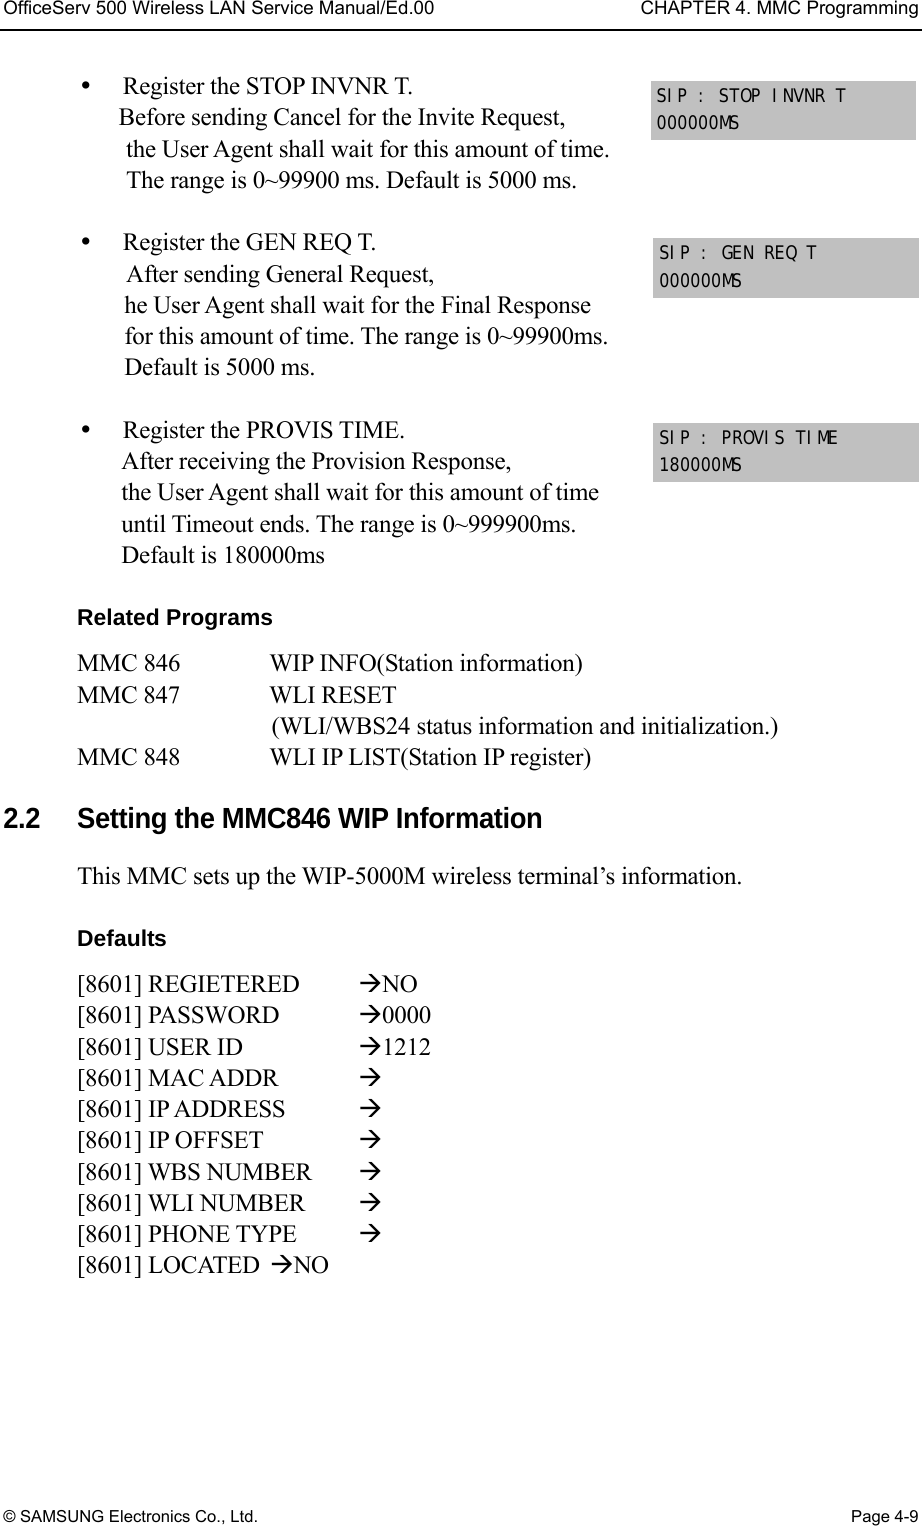 OfficeServ 500 Wireless LAN Service Manual/Ed.00  CHAPTER 4. MMC Programming © SAMSUNG Electronics Co., Ltd.  Page 4-9   Register the STOP INVNR T. Before sending Cancel for the Invite Request,   the User Agent shall wait for this amount of time.   The range is 0~99900 ms. Default is 5000 ms.    Register the GEN REQ T. After sending General Request,   he User Agent shall wait for the Final Response   for this amount of time. The range is 0~99900ms.   Default is 5000 ms.    Register the PROVIS TIME. After receiving the Provision Response,   the User Agent shall wait for this amount of time   until Timeout ends. The range is 0~999900ms.   Default is 180000ms  Related Programs MMC 846       WIP INFO(Station information)   MMC 847   WLI RESET   (WLI/WBS24 status information and initialization.)   MMC 848   WLI IP LIST(Station IP register)  2.2    Setting the MMC846 WIP Information This MMC sets up the WIP-5000M wireless terminal’s information.    Defaults [8601] REGIETERED  NO [8601] PASSWORD  0000 [8601] USER ID    1212 [8601] MAC ADDR   [8601] IP ADDRESS   [8601] IP OFFSET    [8601] WBS NUMBER   [8601] WLI NUMBER   [8601] PHONE TYPE   [8601] LOCATED  NO  SIP : GEN REQ T 000000MS SIP : PROVIS TIME 180000MS SIP : STOP INVNR T  000000MS 